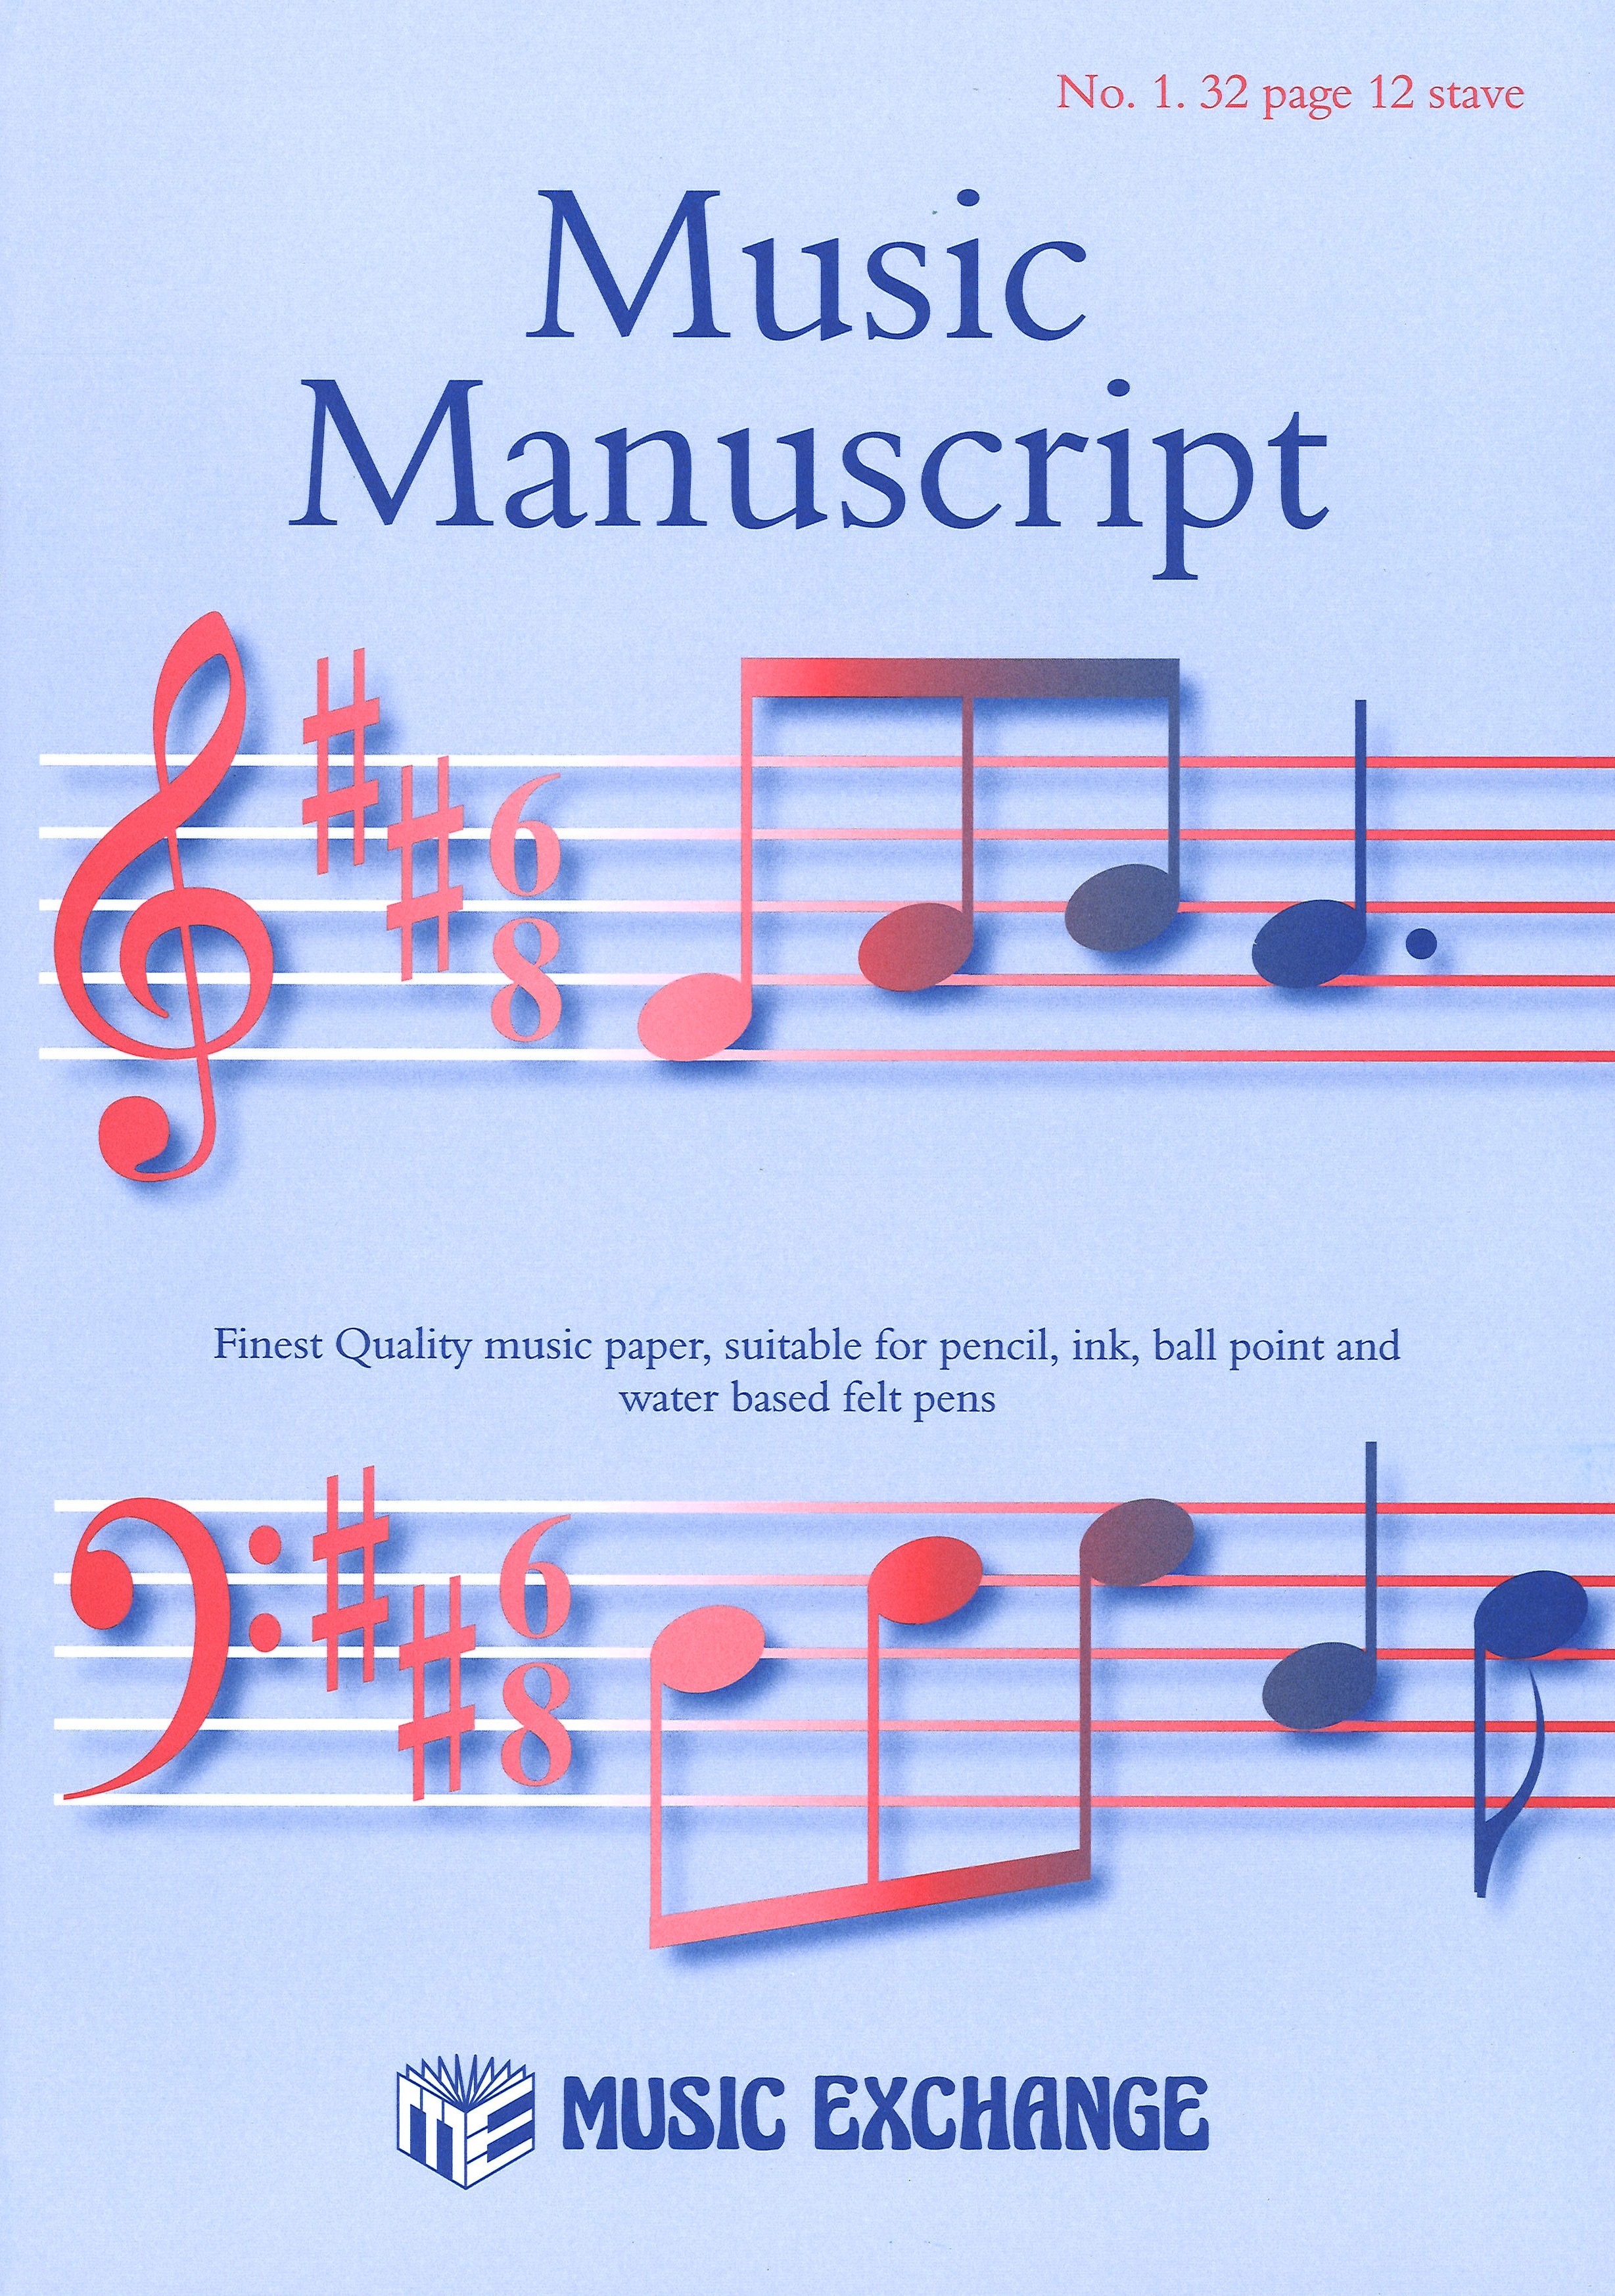 Music Manuscript No 1 (32 Page 12 Stave) Sheet Music Songbook